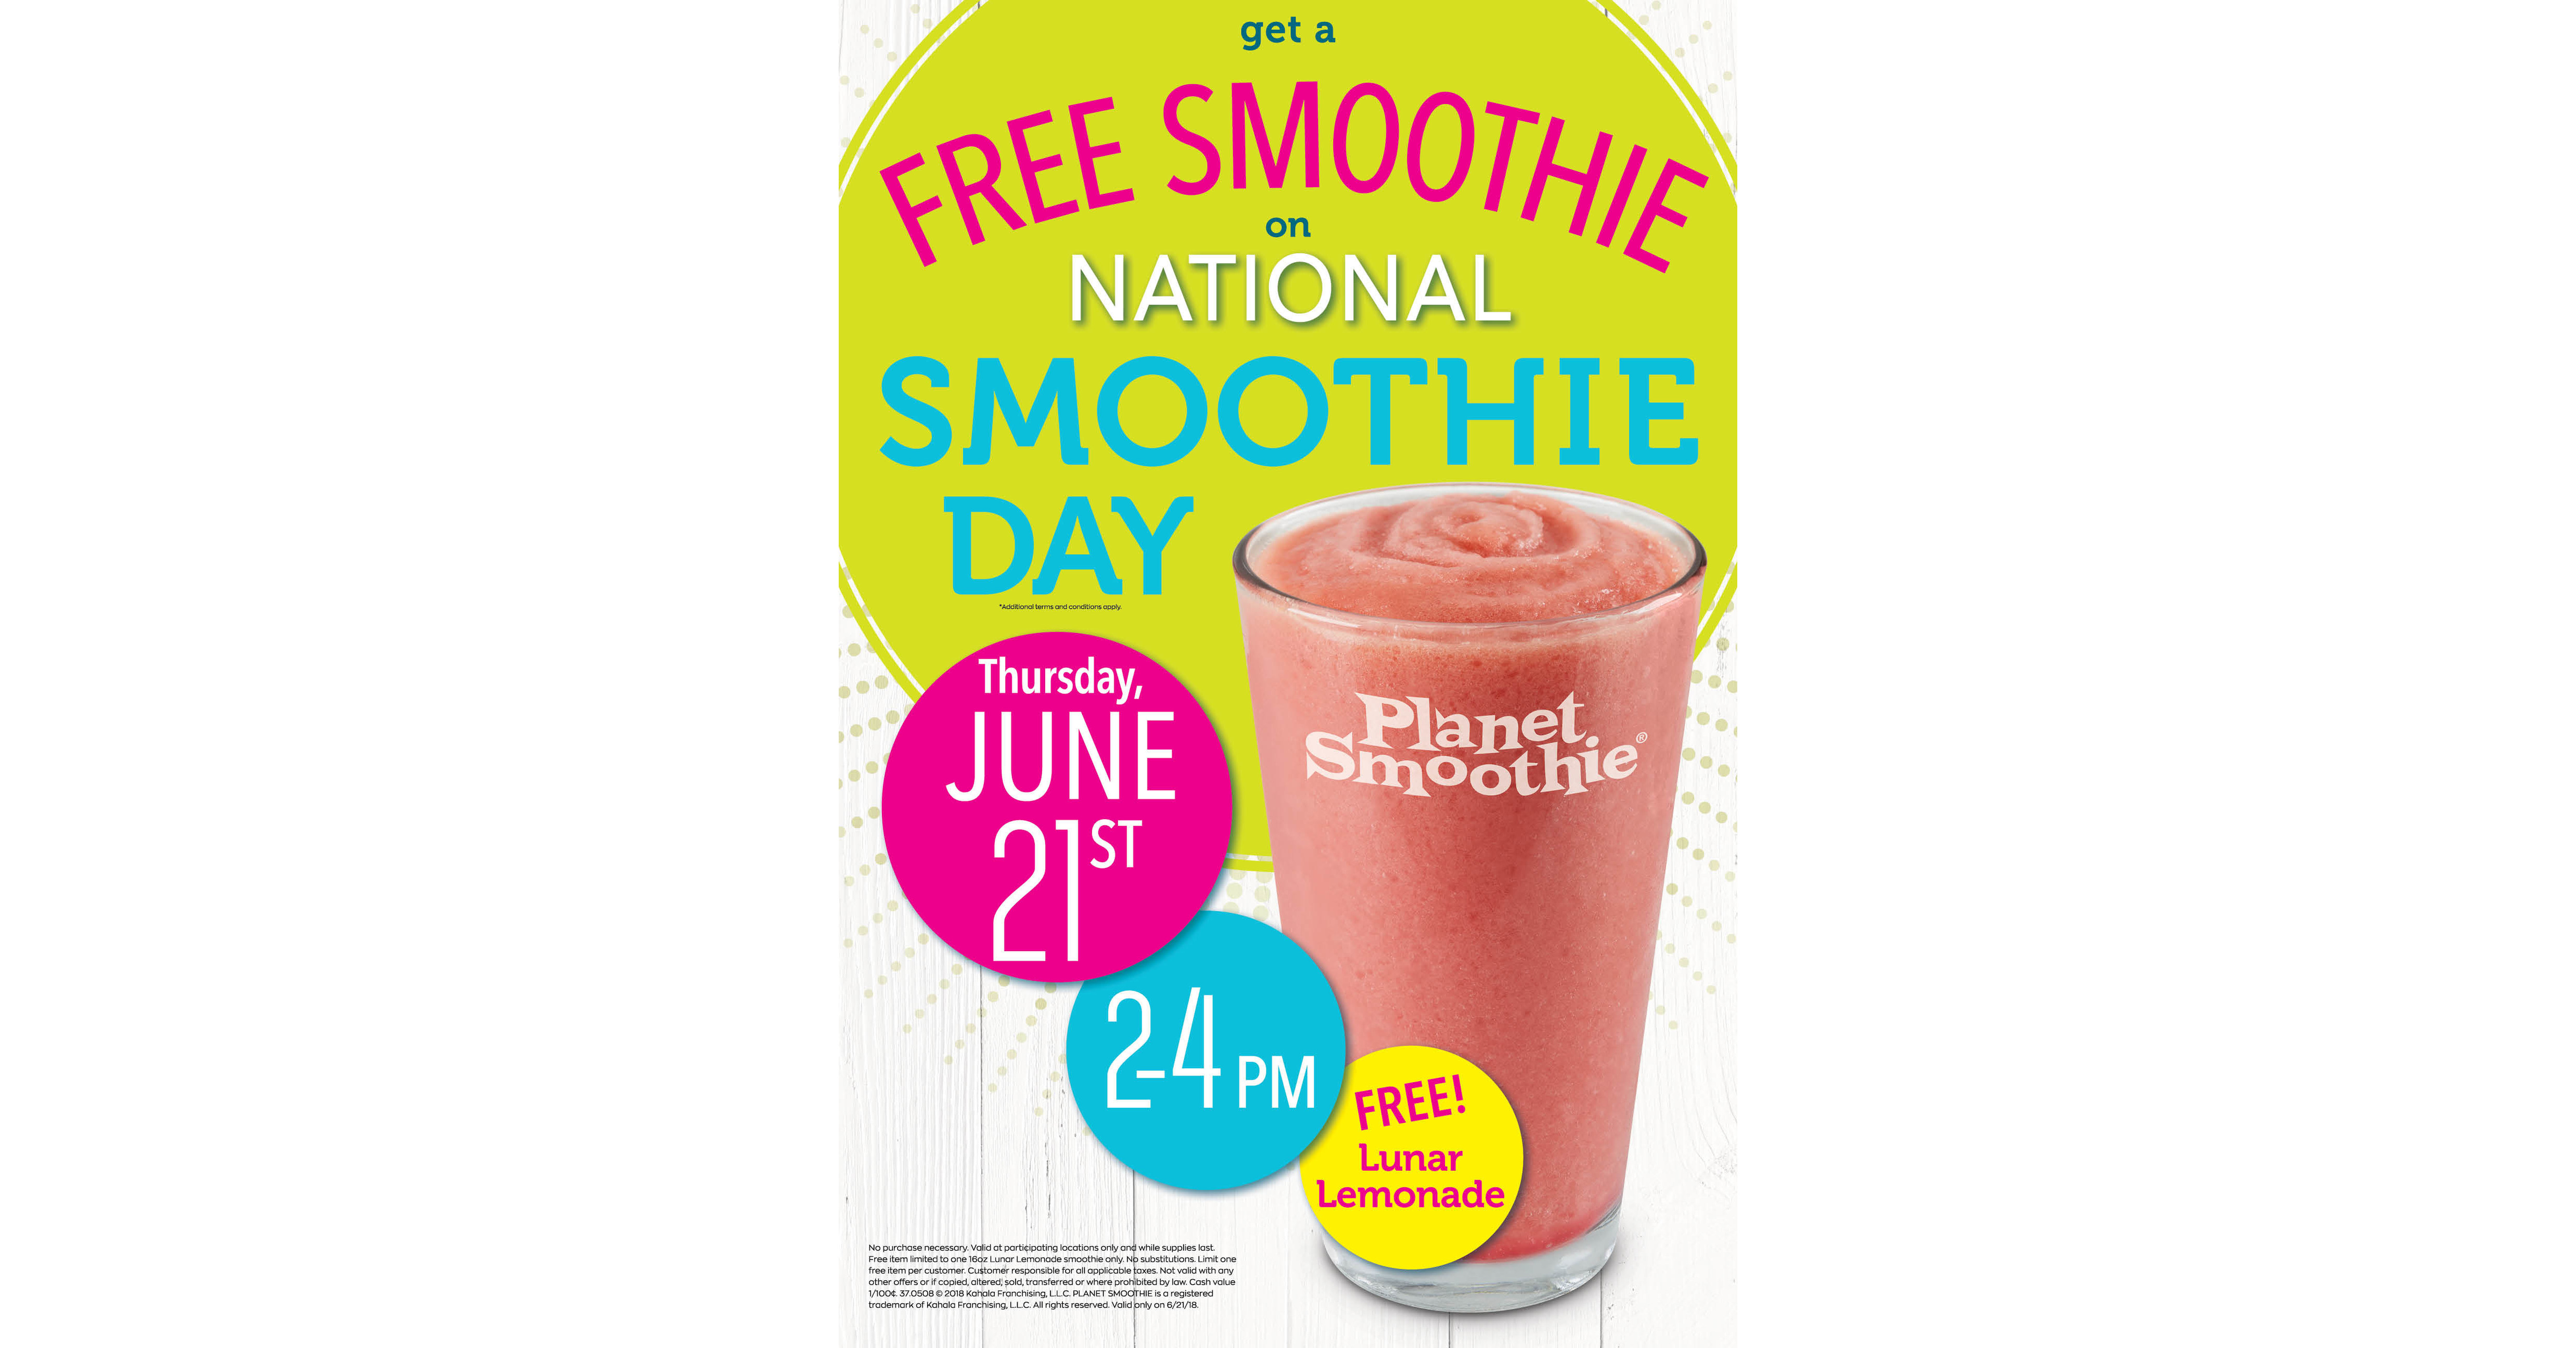 Celebrate National Smoothie Day with a FREE Smoothie